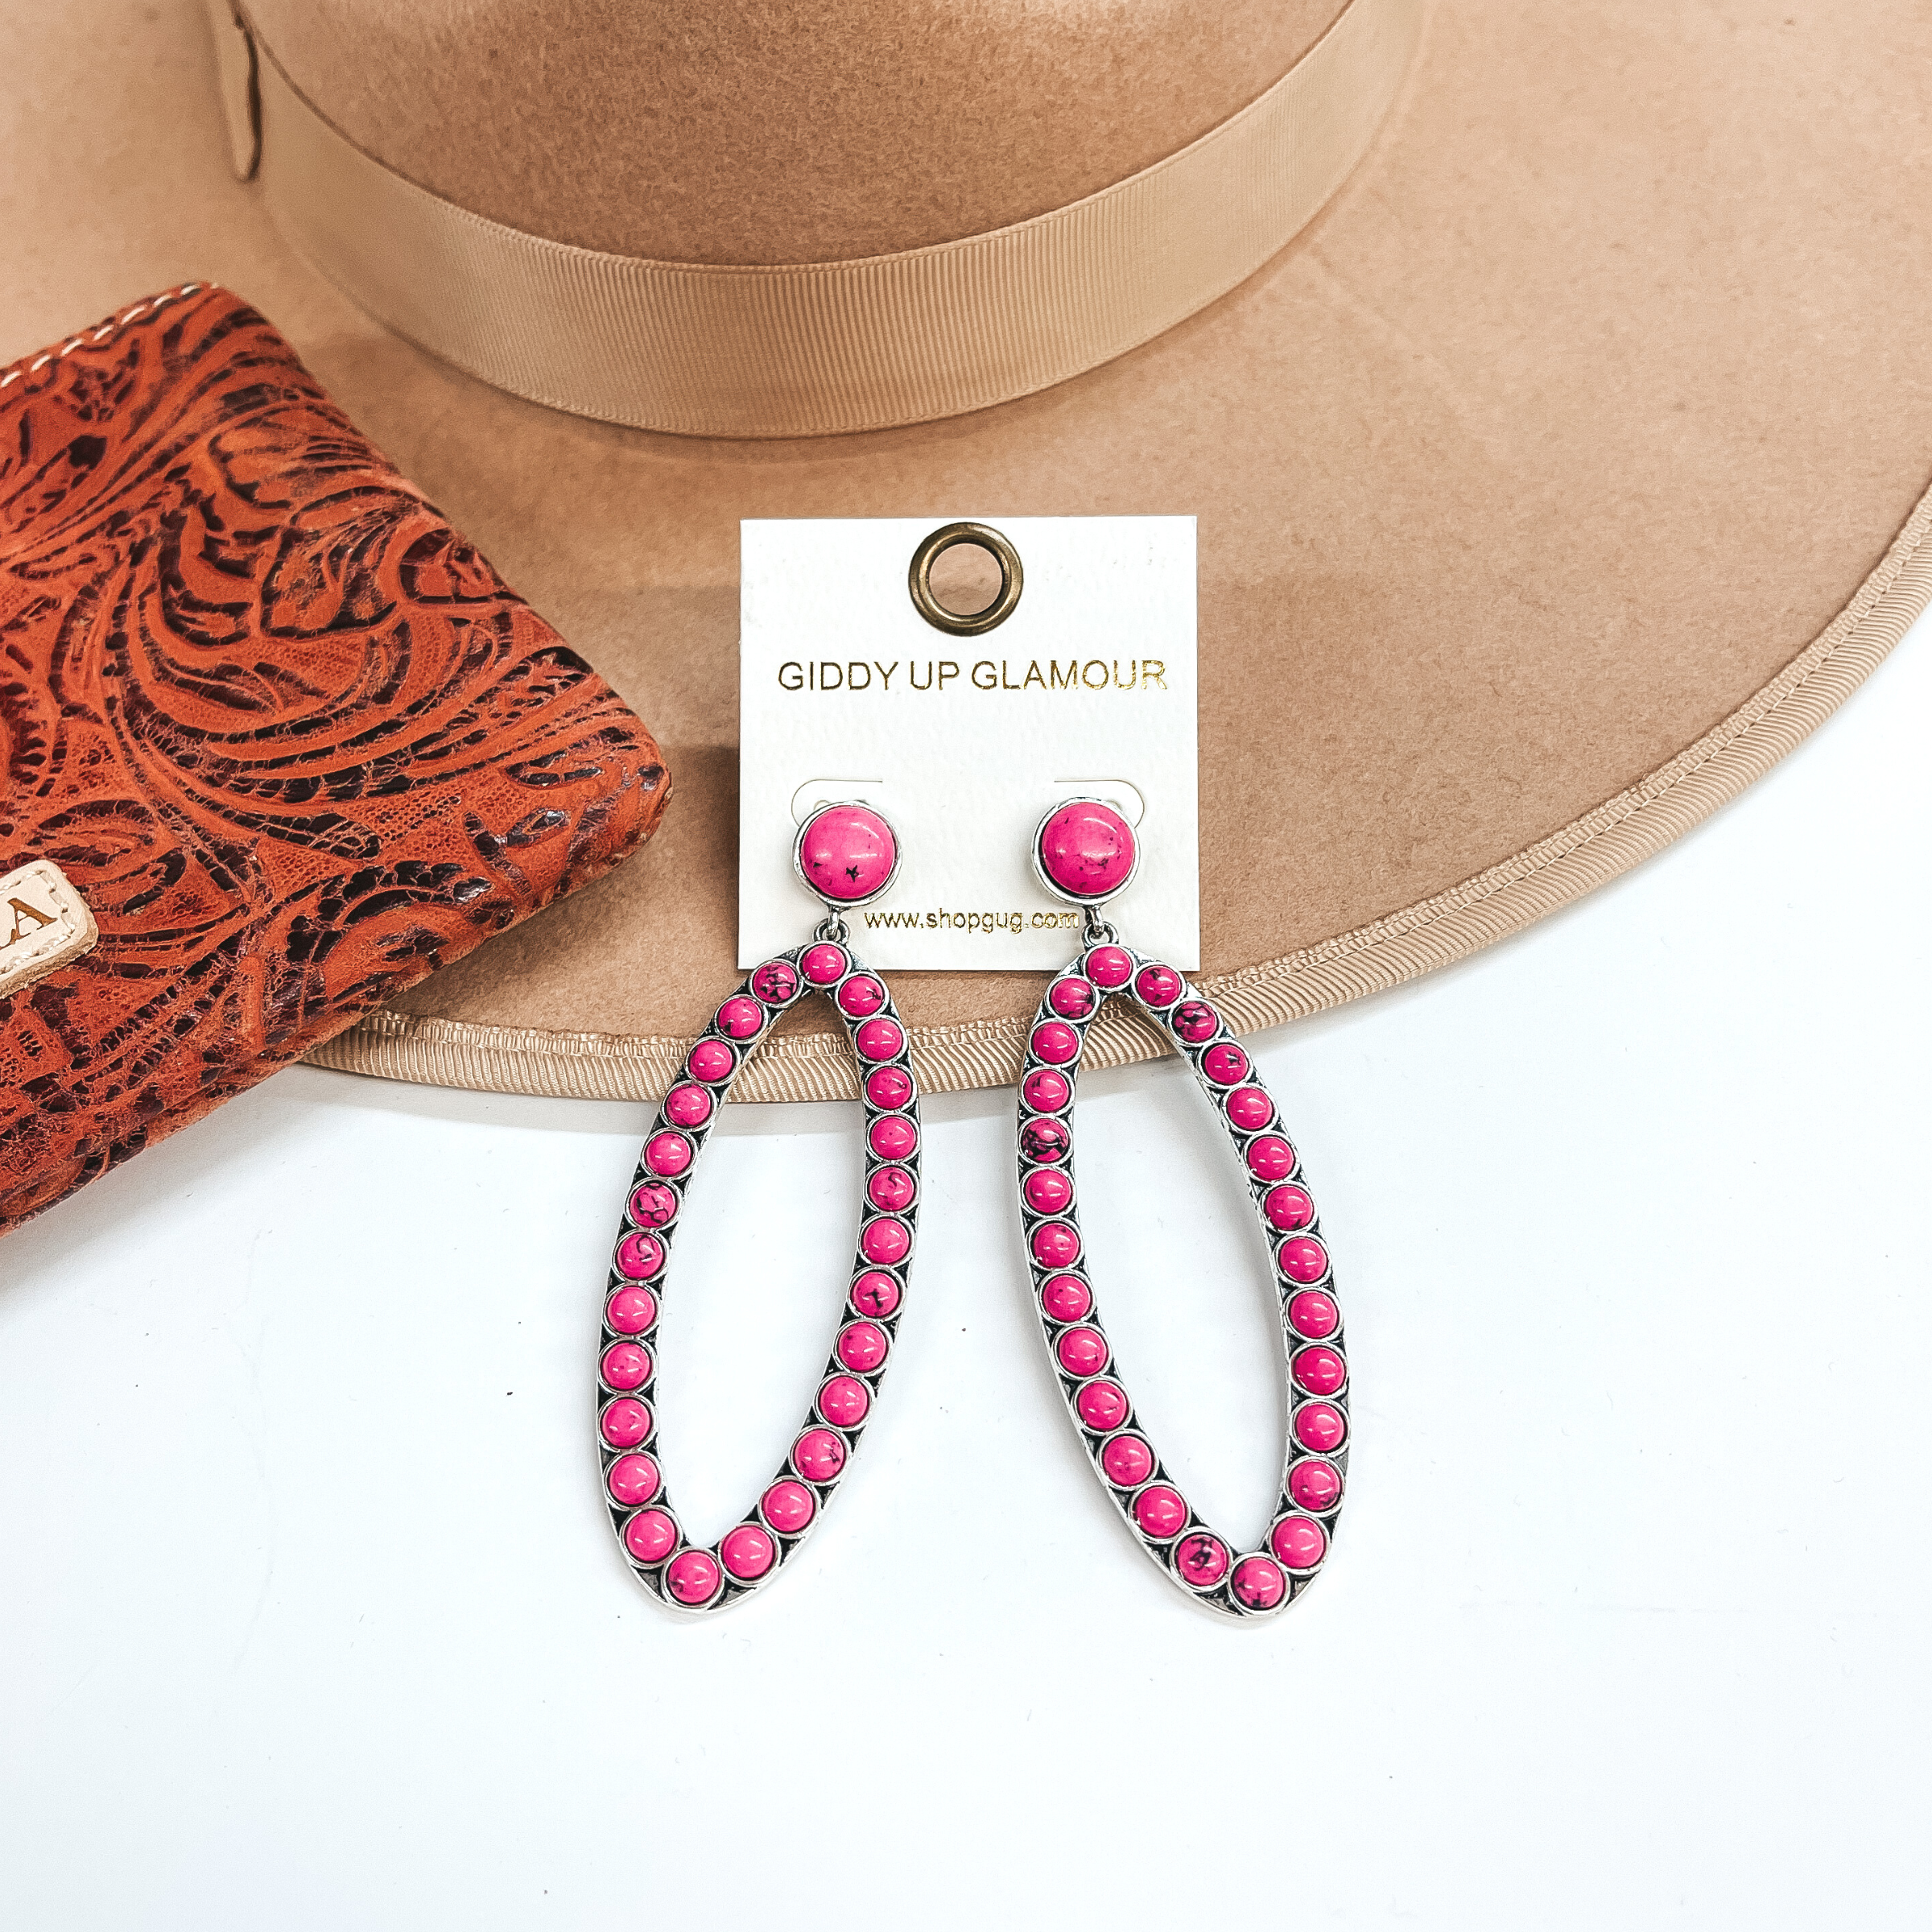 These are open oval drop earrings with pink stones.  Post back earrings with a small stone and an open  oval drop with pink stones all around. These are  taken on a light brown hat brim and white background.  There is a leather printed wallet in the side  as decor.